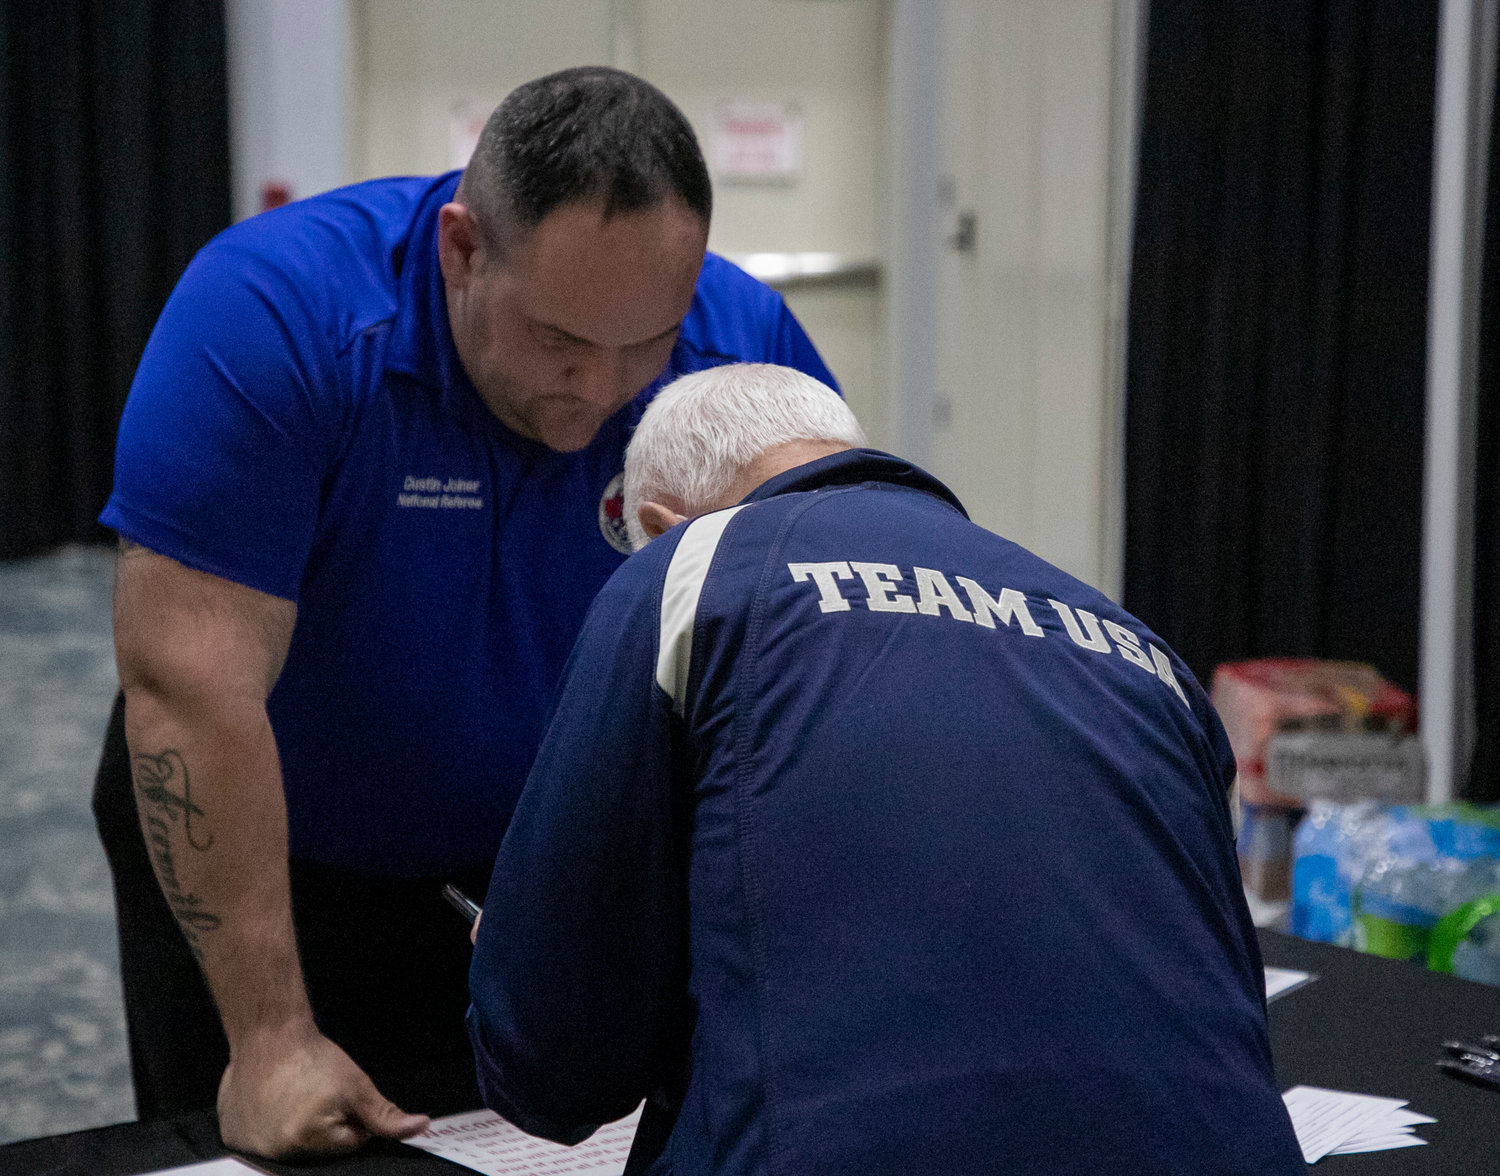 Officials meet Wednesday afternoon in preparation for the world powerlifting championships at the Orange Beach Event Center this weekend. Lifting is set to begin at 9 a.m. every day from Thursday to Sunday.